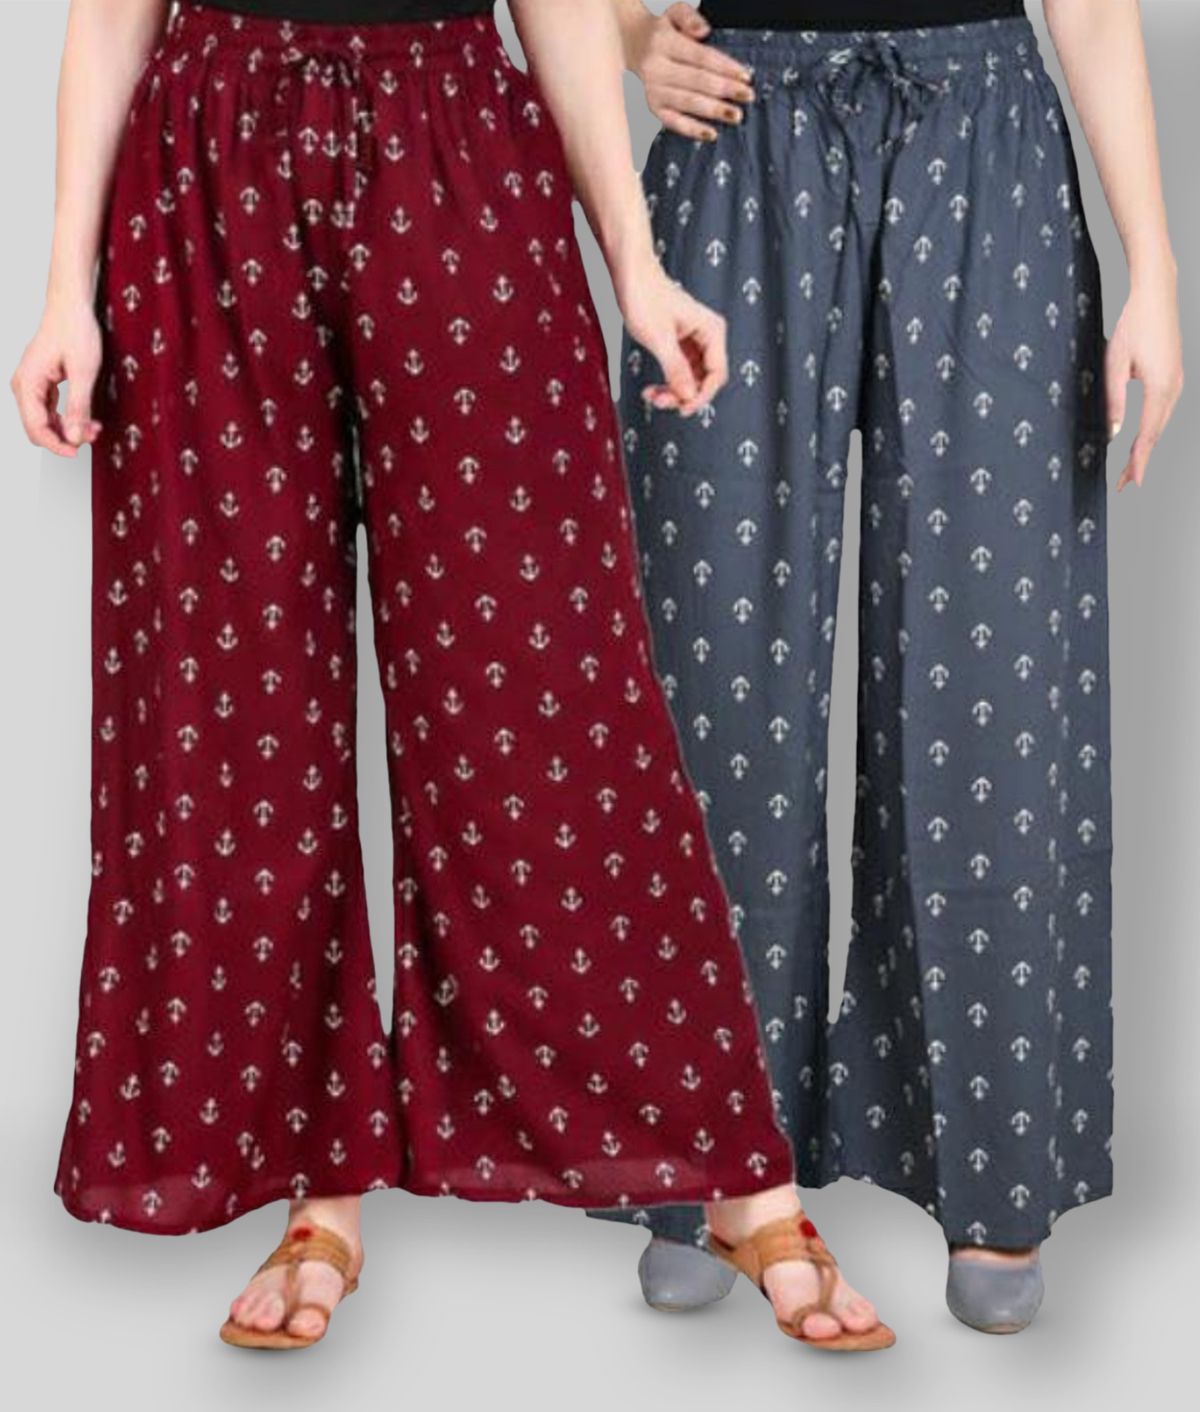     			Neelam Fashion - Multicolor Rayon Flared Women's Palazzos ( Pack of 2 )